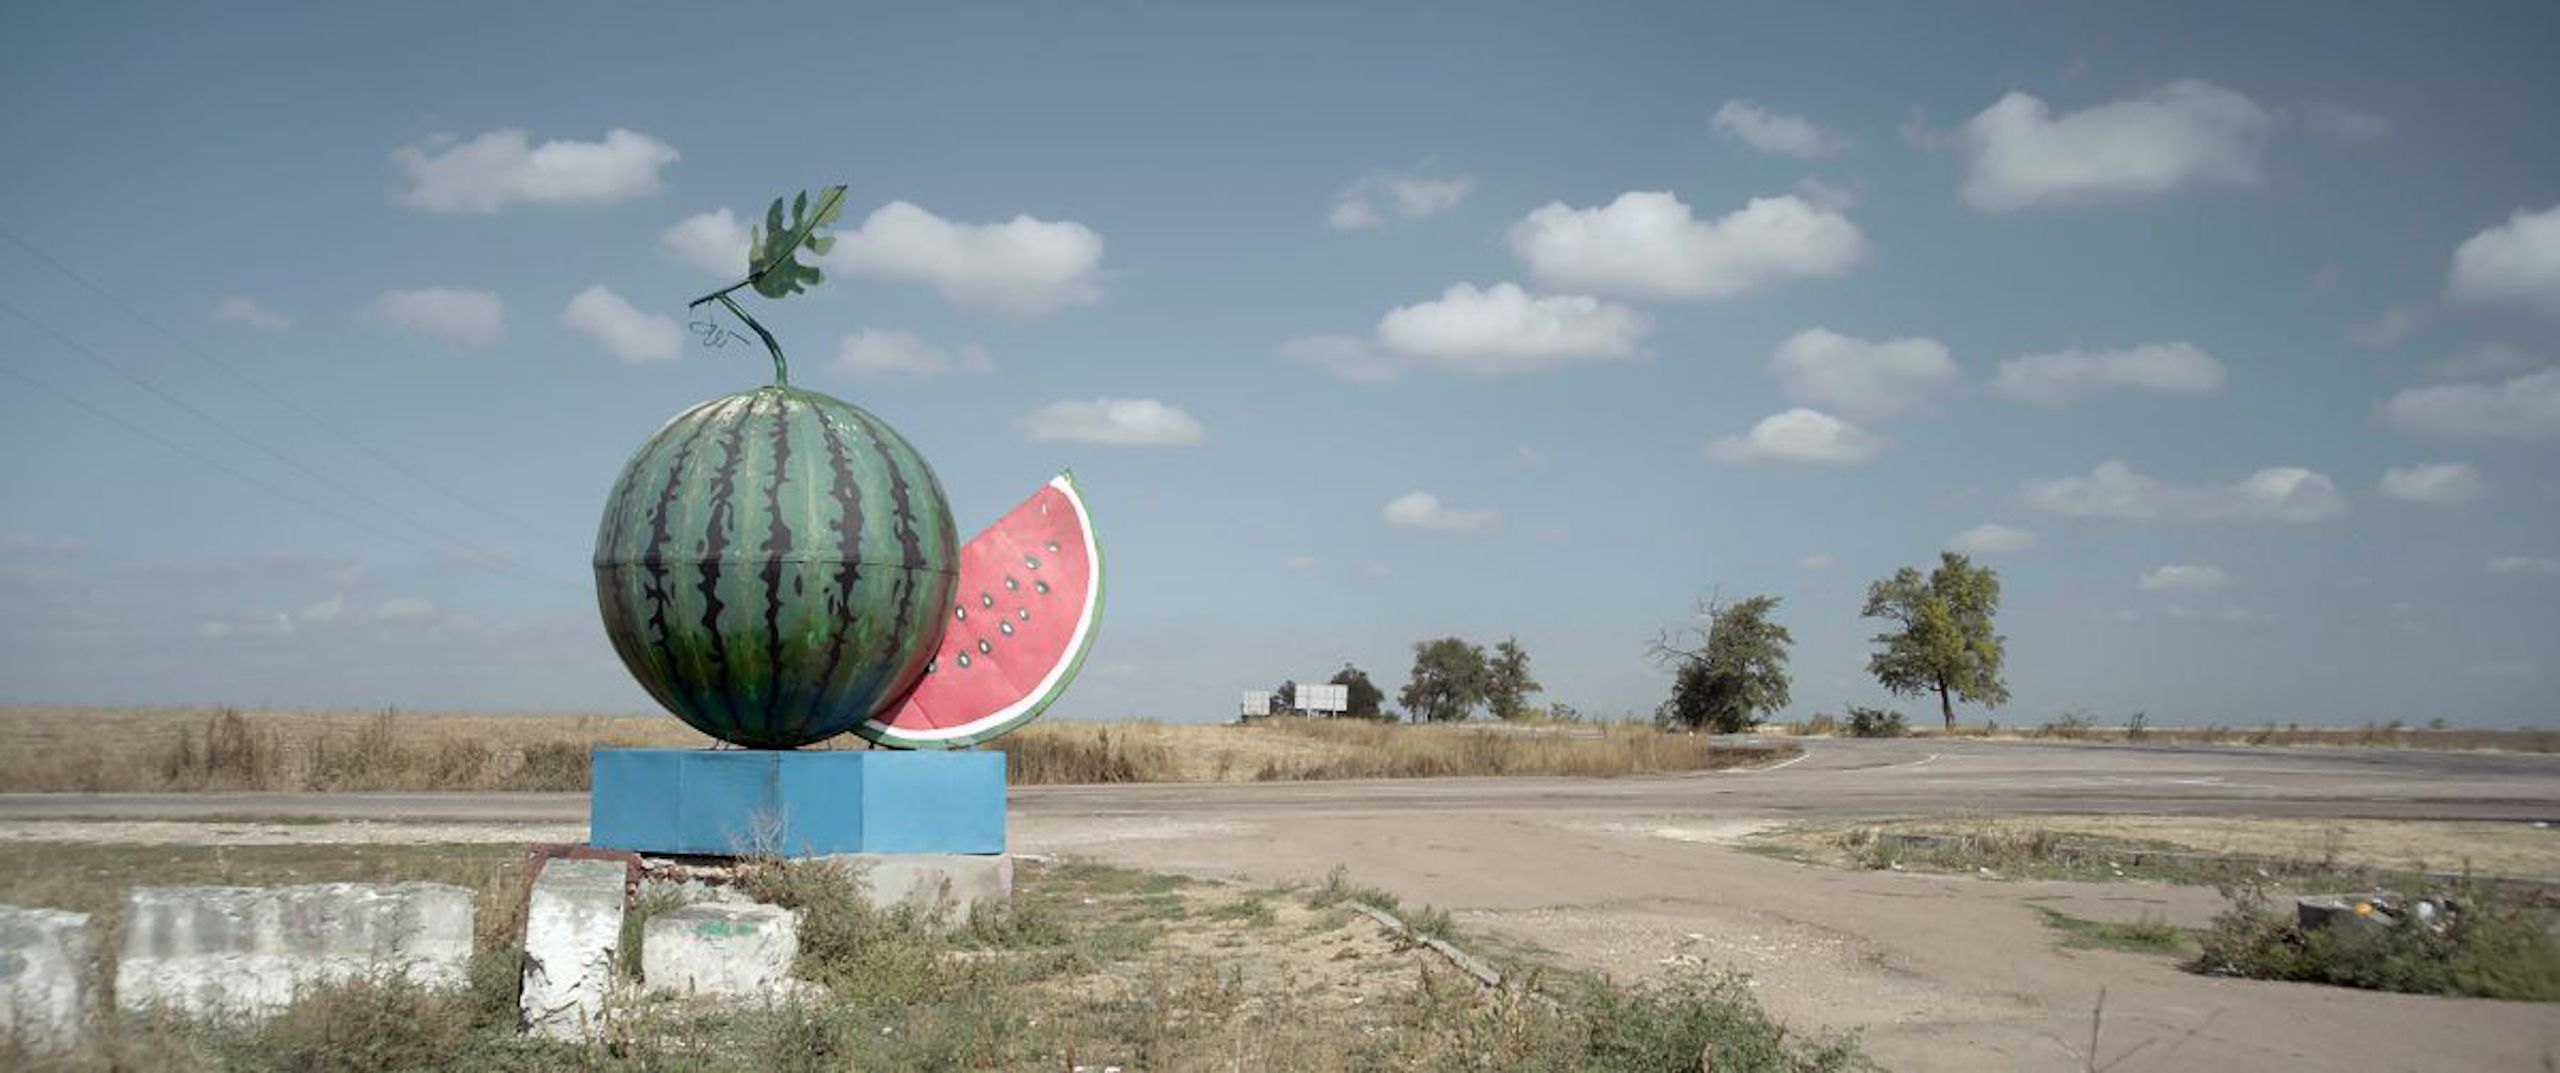 Landscape with a sculpture in shape of a giant water melon next to the road 